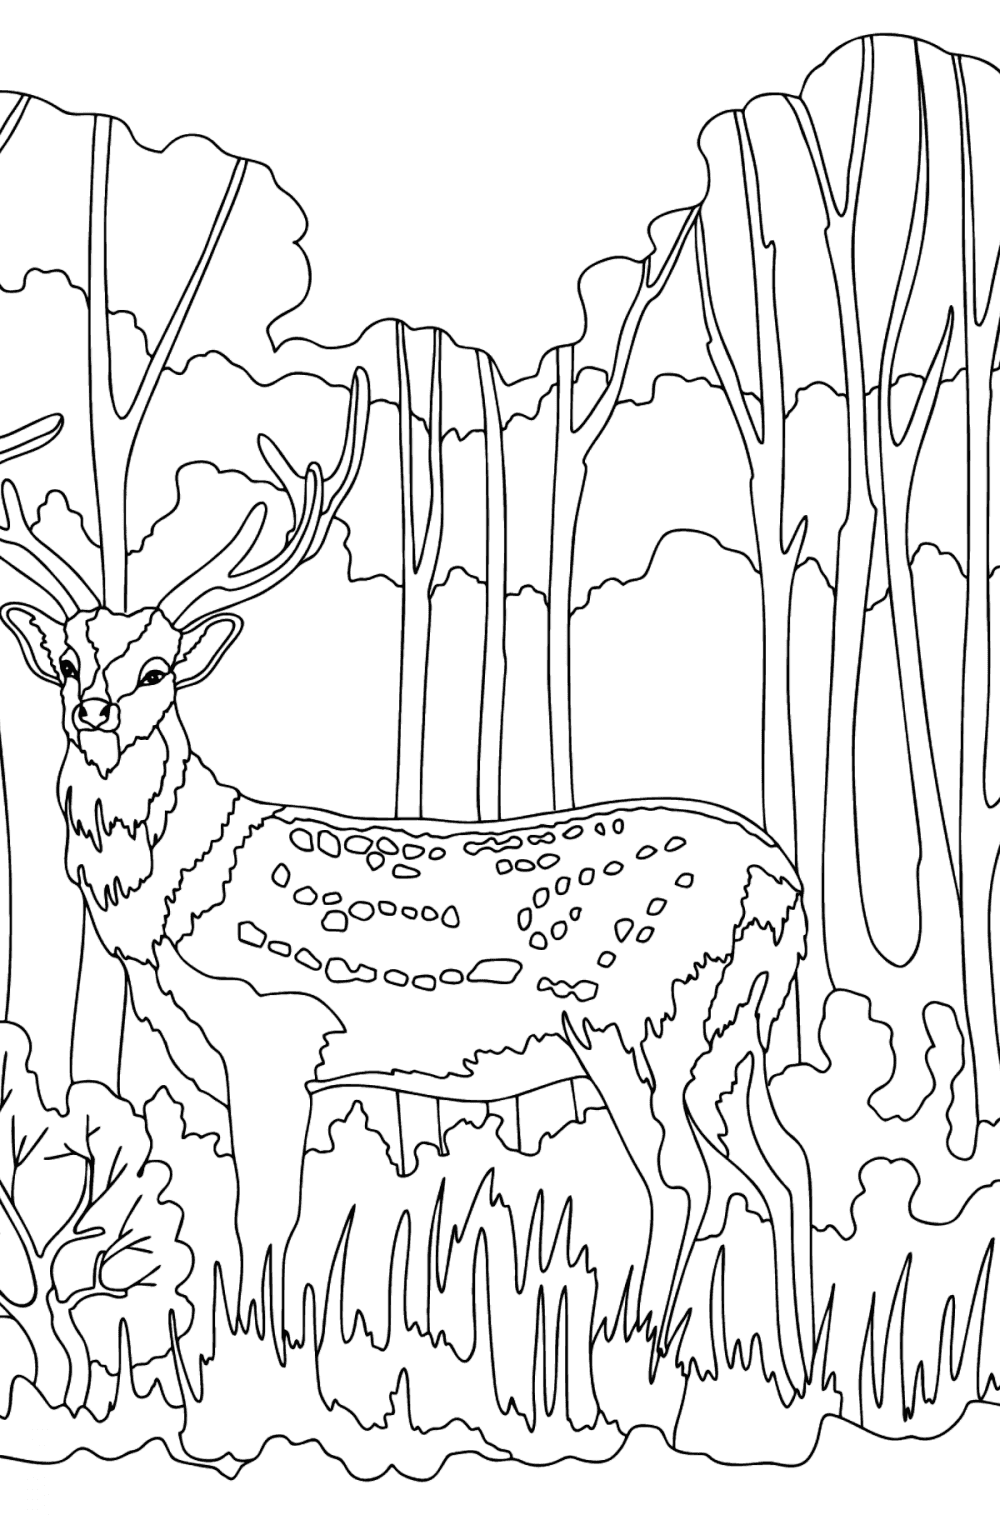 Dappled deer - Deer Coloring Pages for Adults for Free